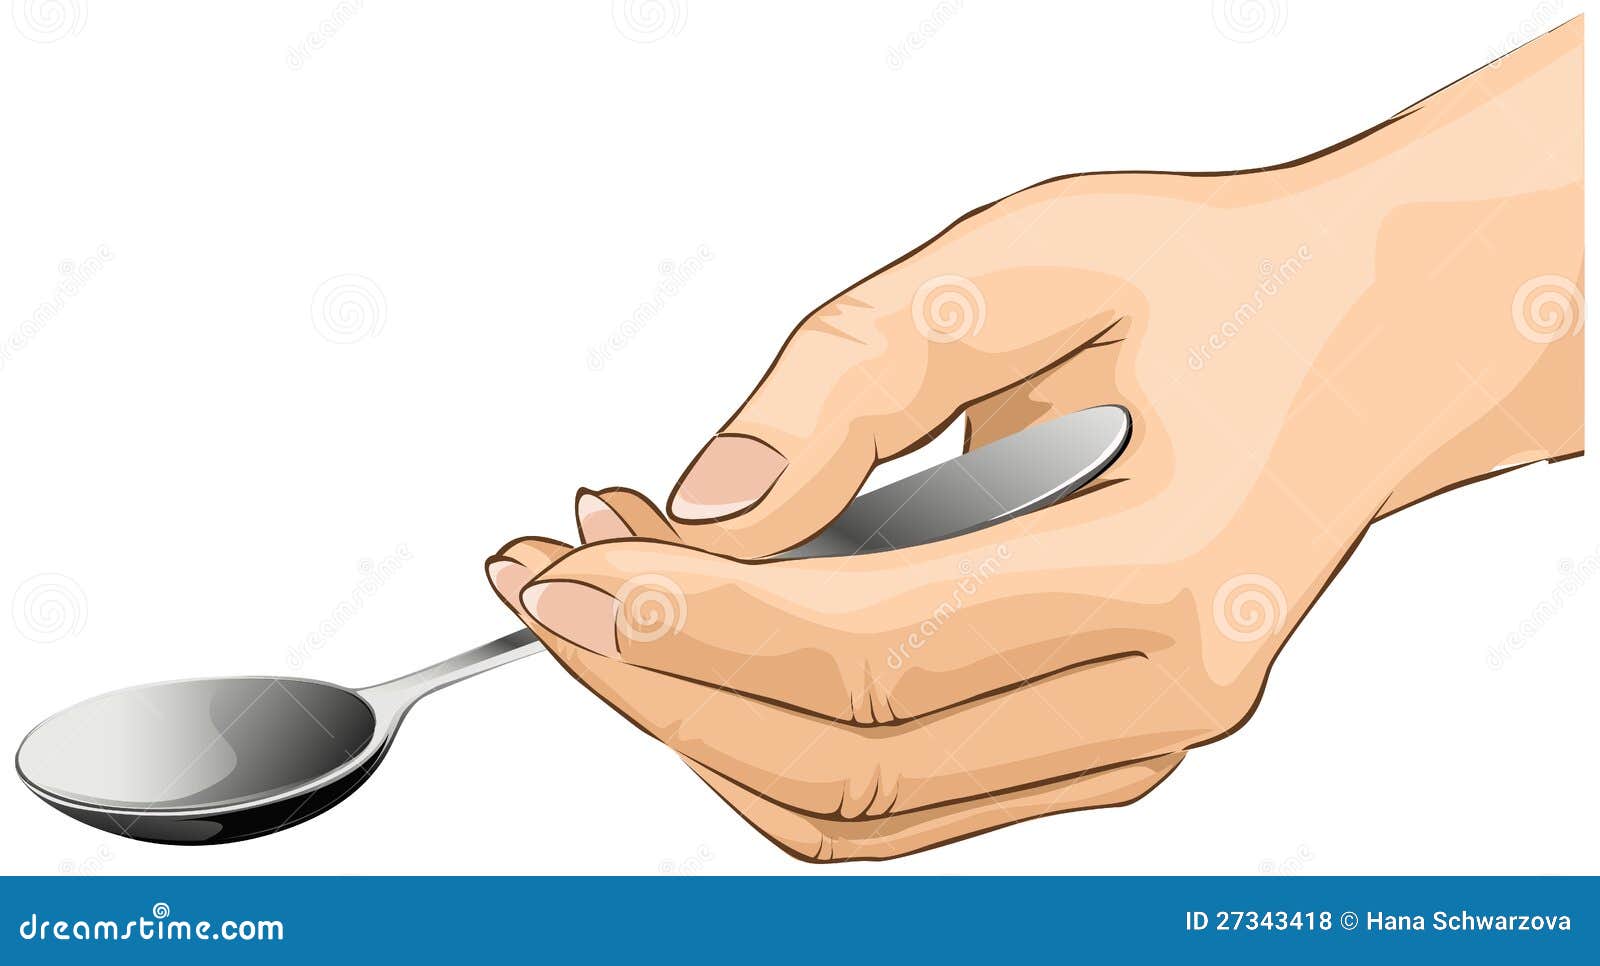 hand is holding a spoon